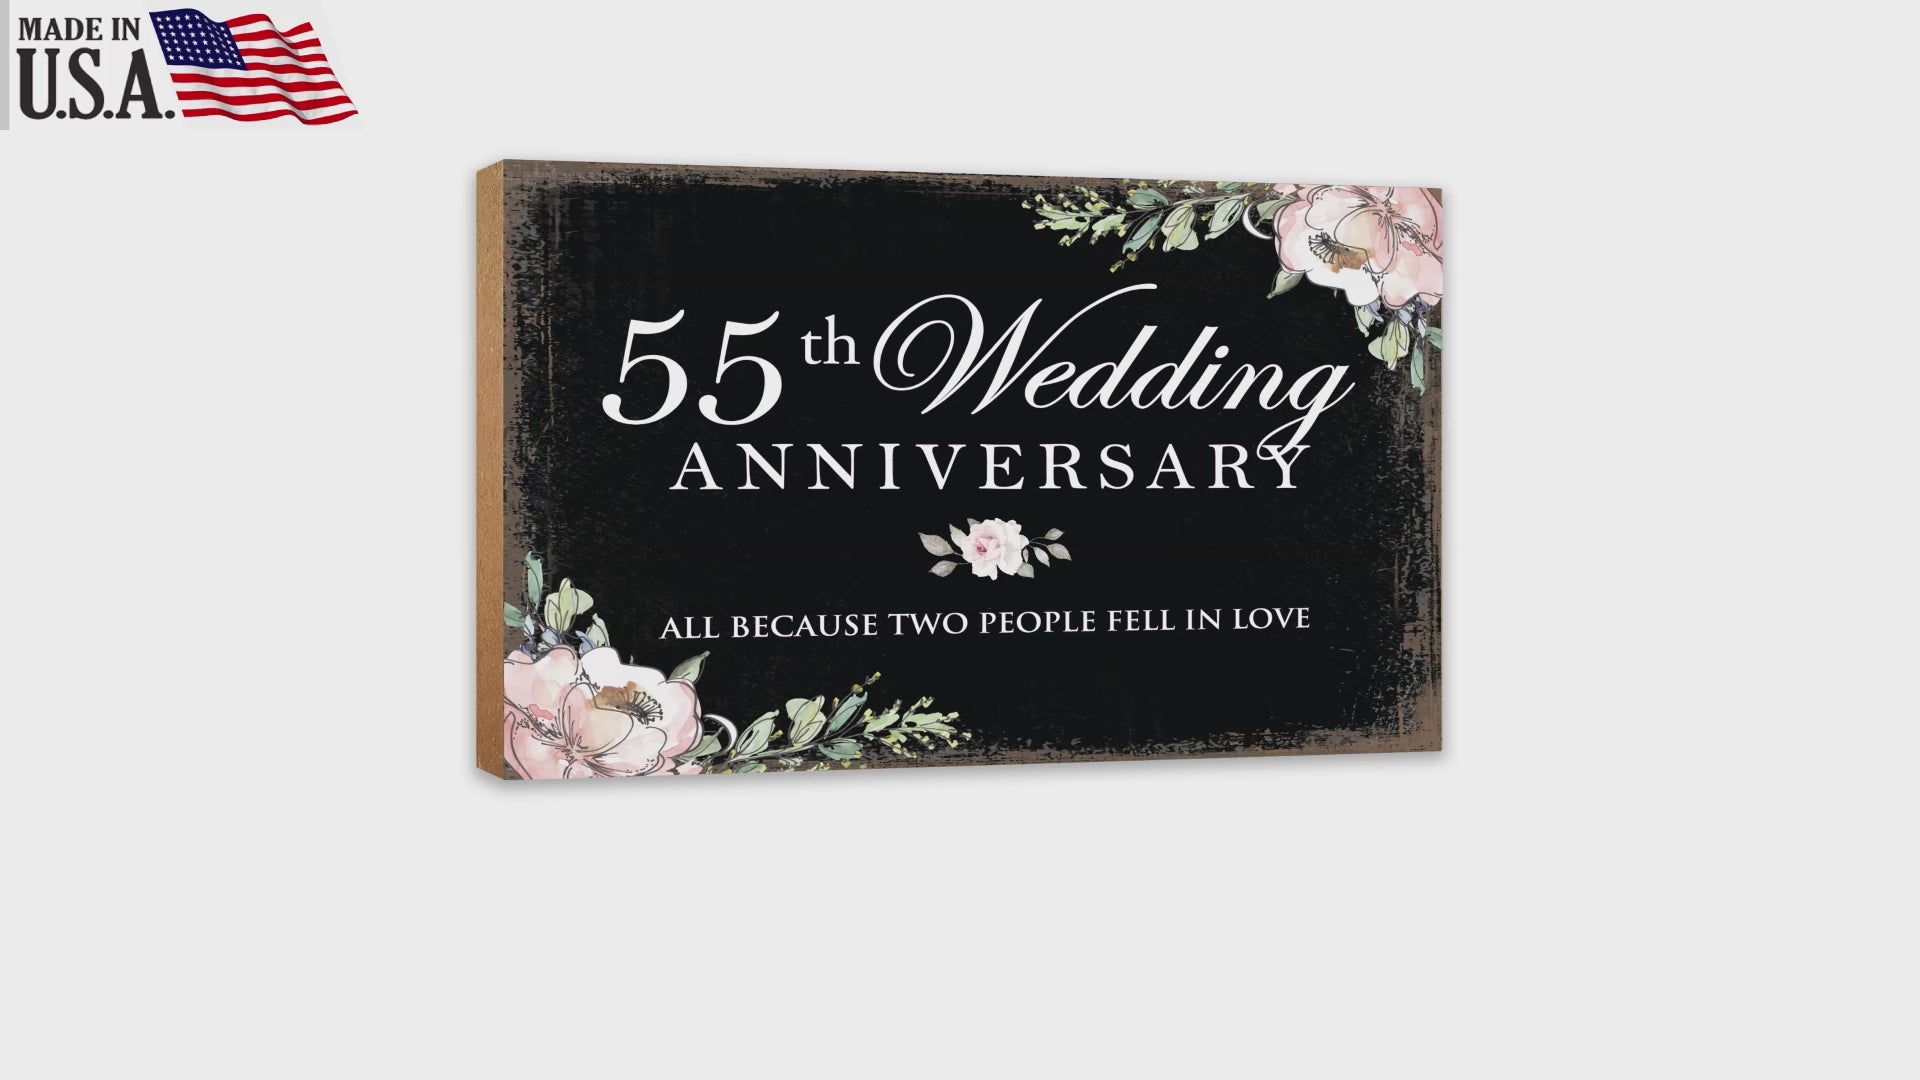 55th Wedding Anniversary Unique Shelf Decor and Tabletop Signs Gifts for Couples - Fell In Love